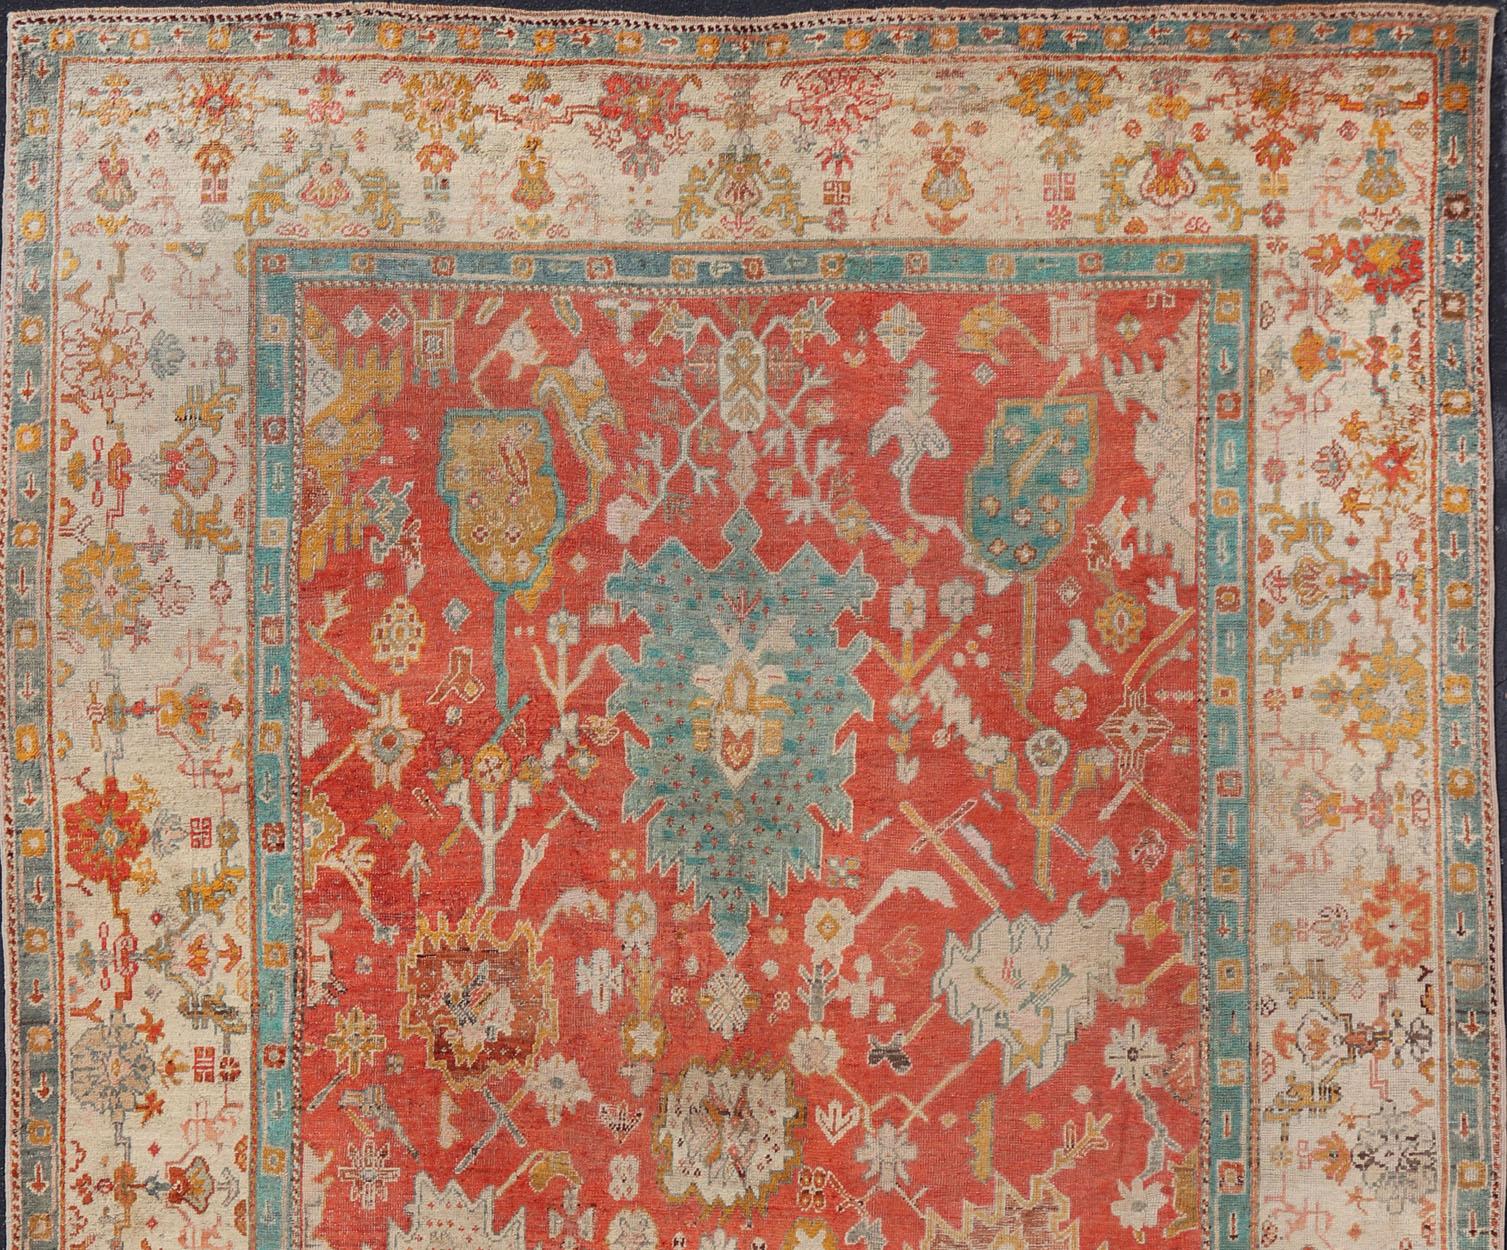 Antique Turkish Oushak In Tribal Motifs in Soft Coral, Blue, Marigold, and Cream For Sale 4